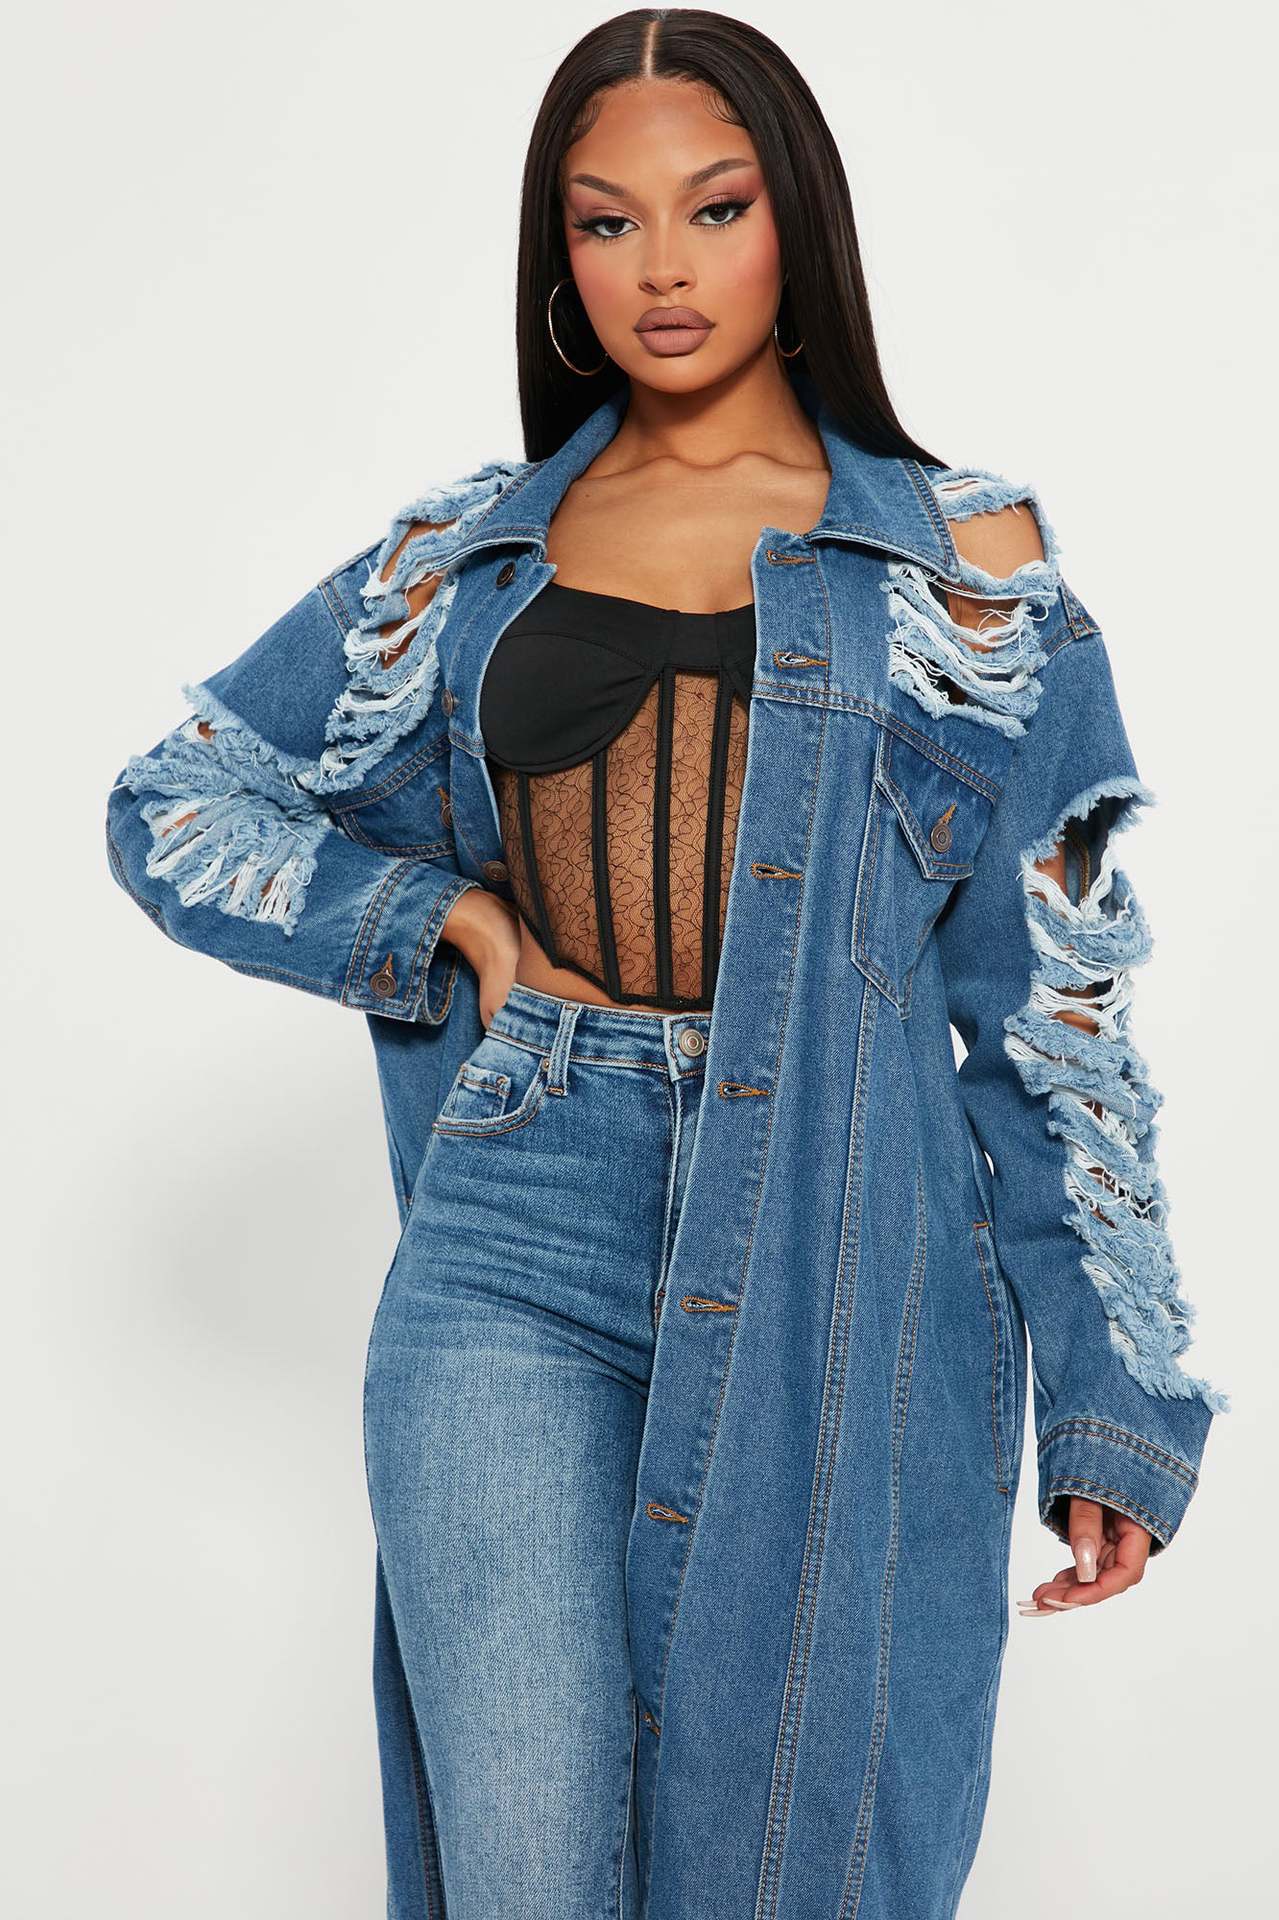 Ripped long sleeve shoulder off denim trench coat